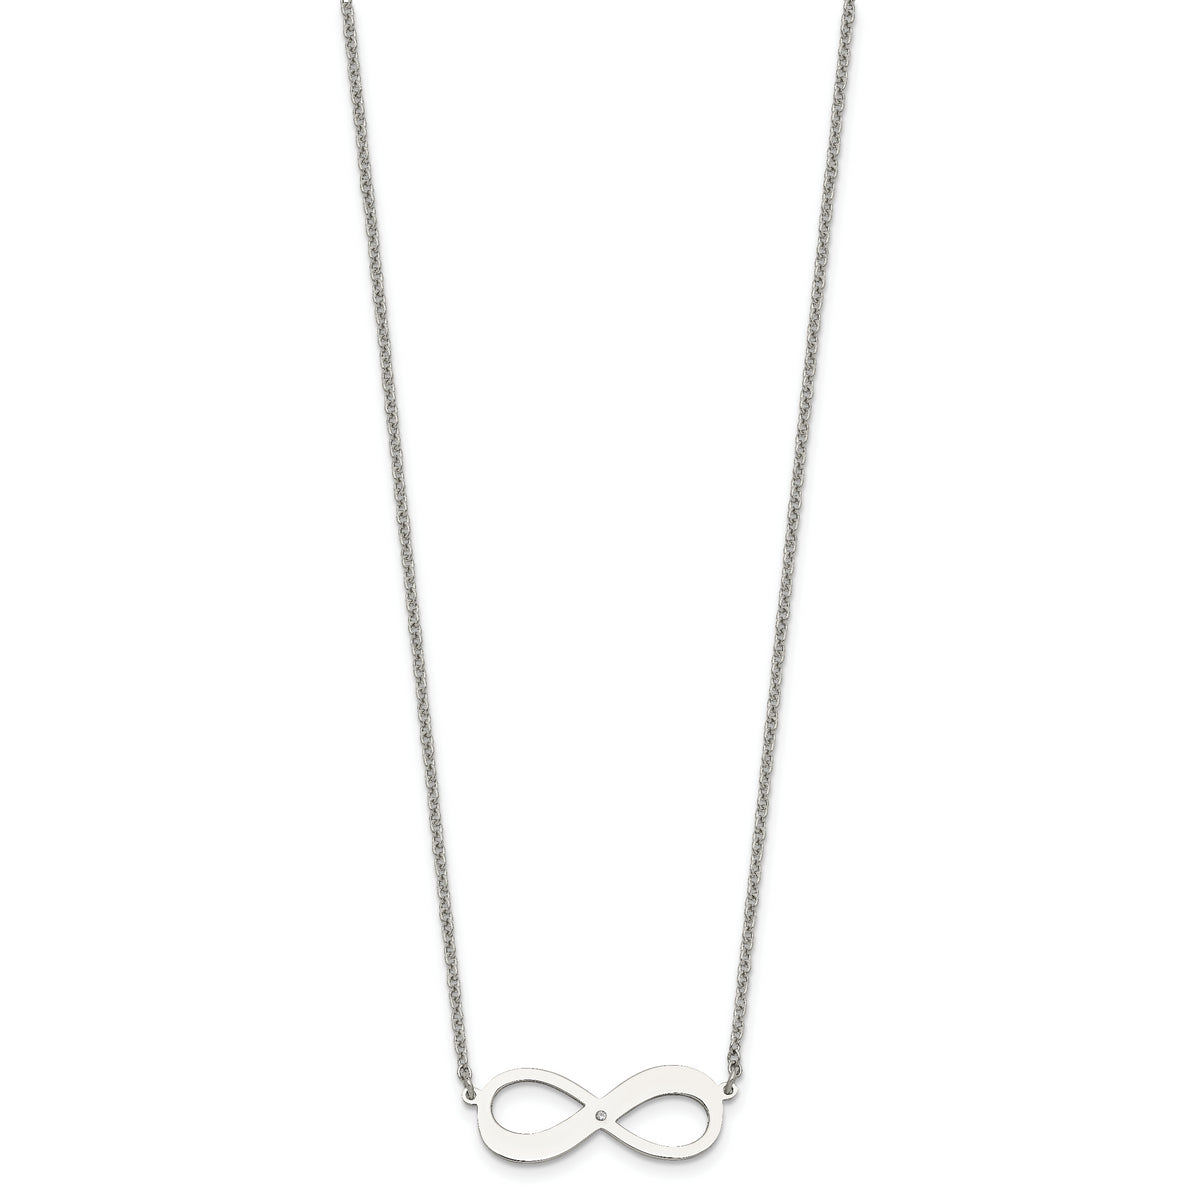 Chisel Stainless Steel Polished Infinity Symbol with CZ on a 16.5 inch Cable Chain with a 2 inch Extension Necklace